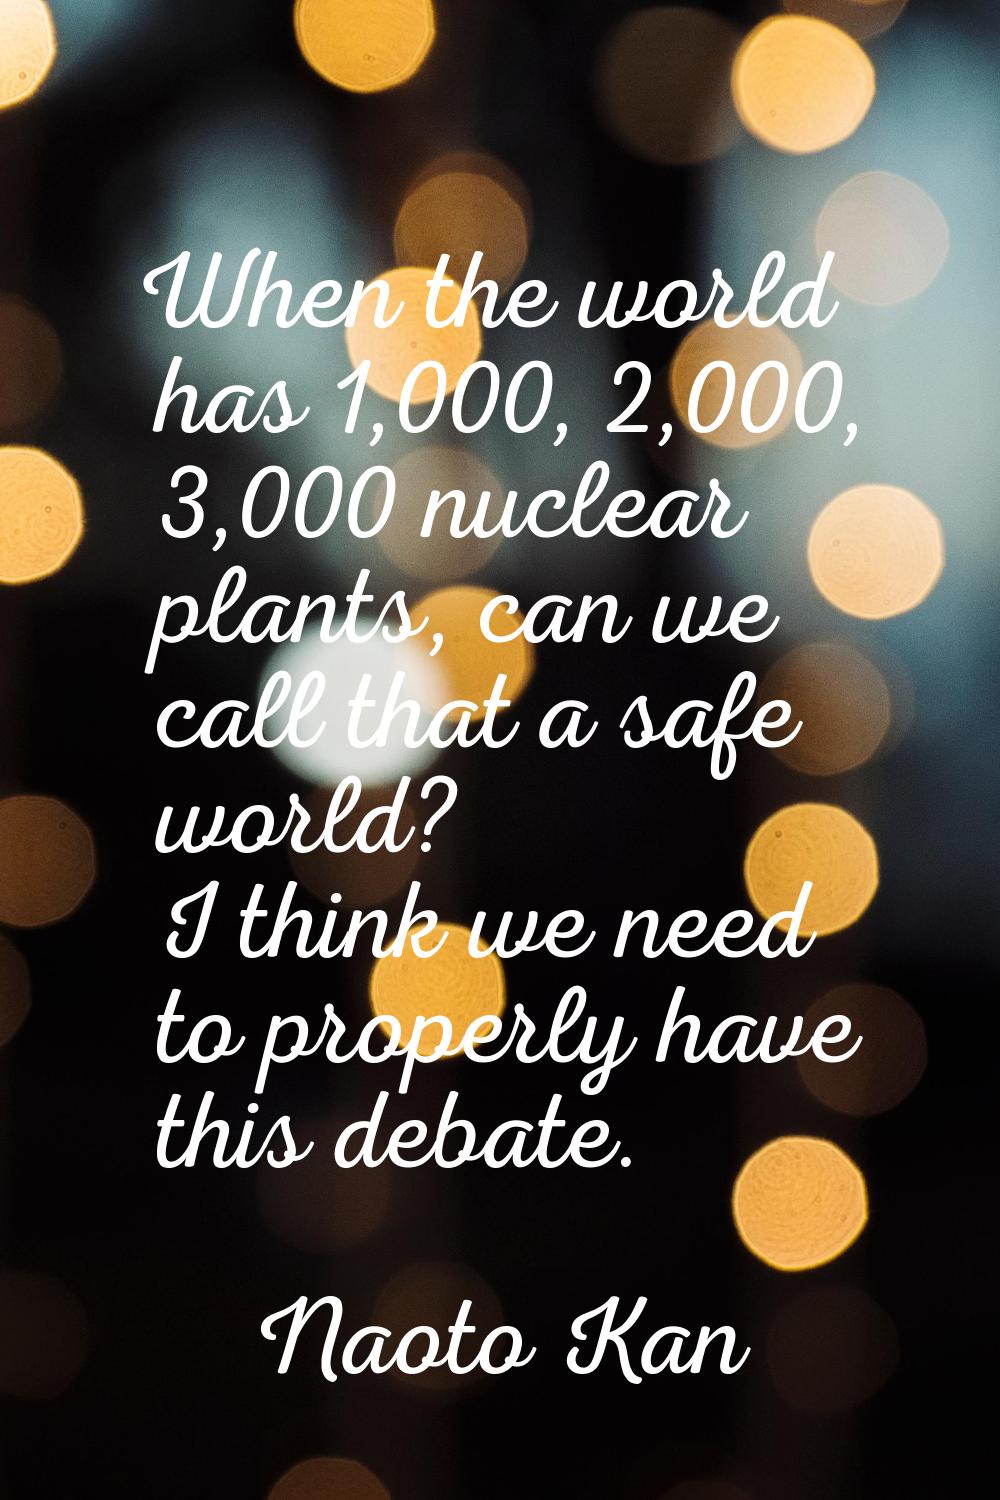 When the world has 1,000, 2,000, 3,000 nuclear plants, can we call that a safe world? I think we ne